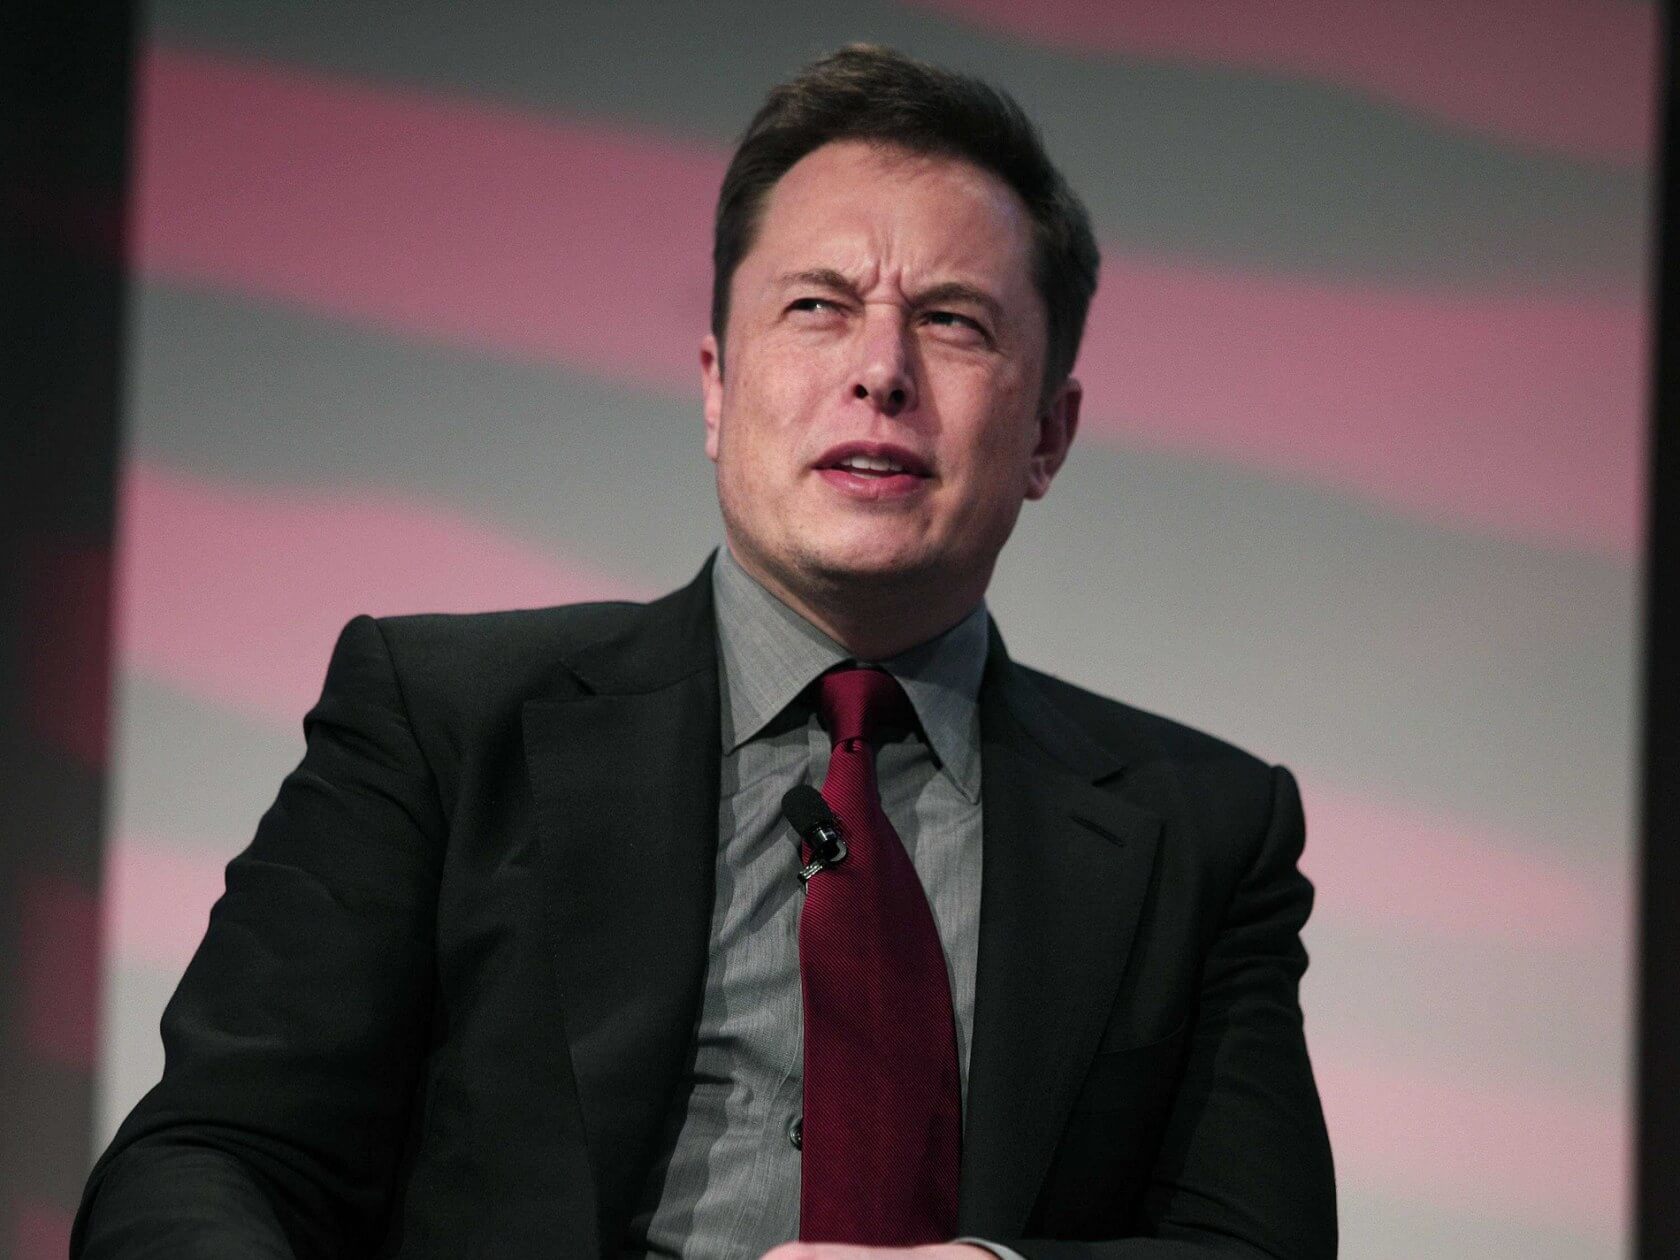 Elon Musk calls Covid-19 tests bogus after receiving different results on same day